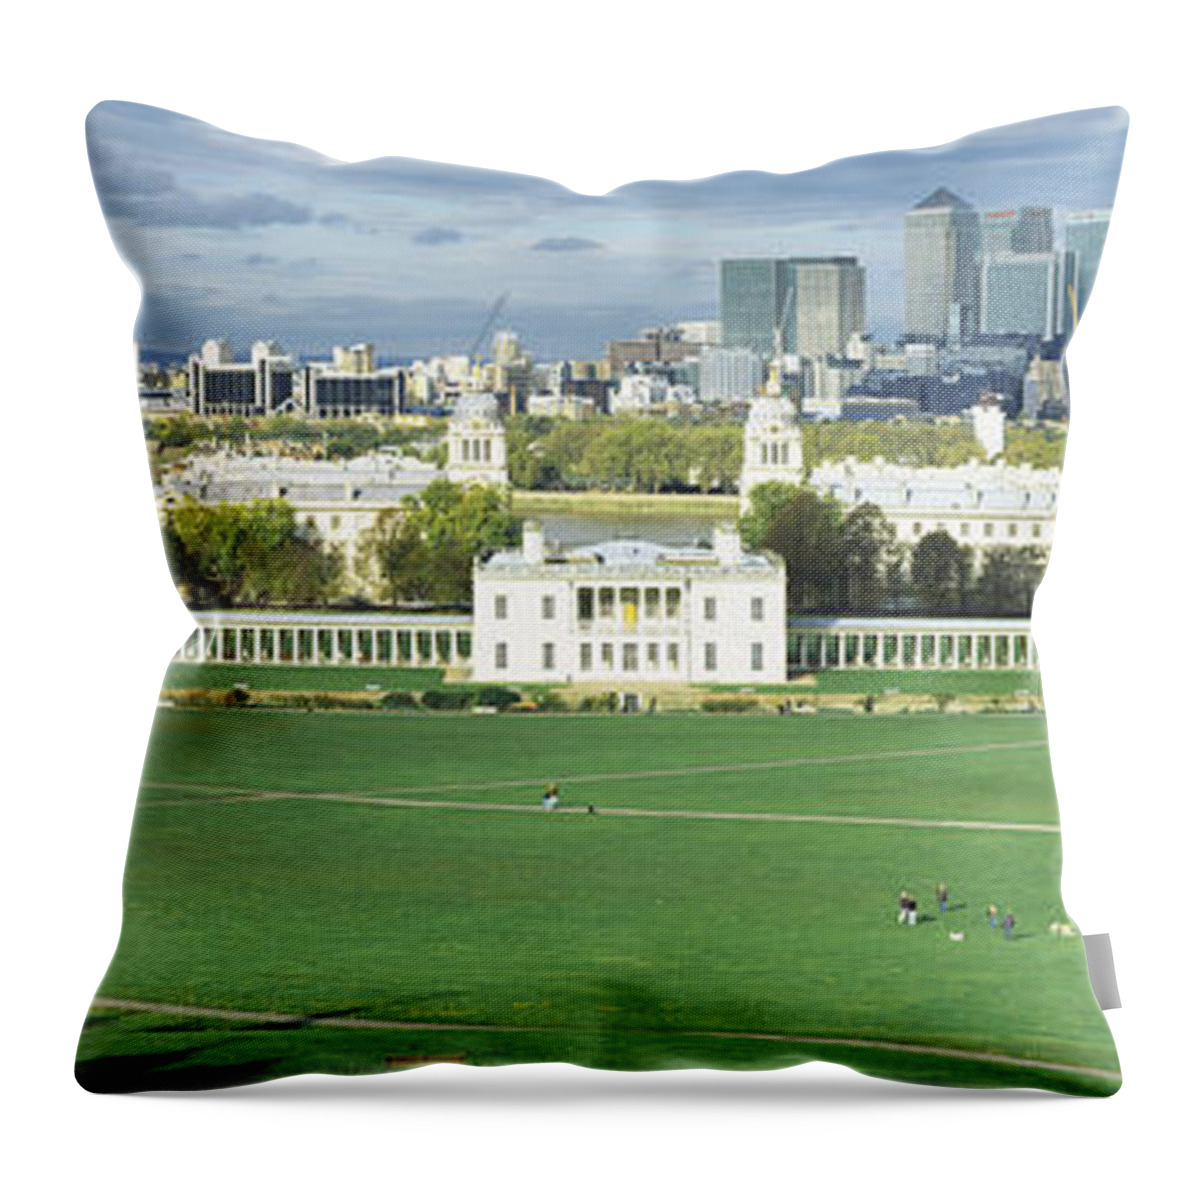 Photography Throw Pillow featuring the photograph Aerial View Of A City, Canary Wharf by Panoramic Images